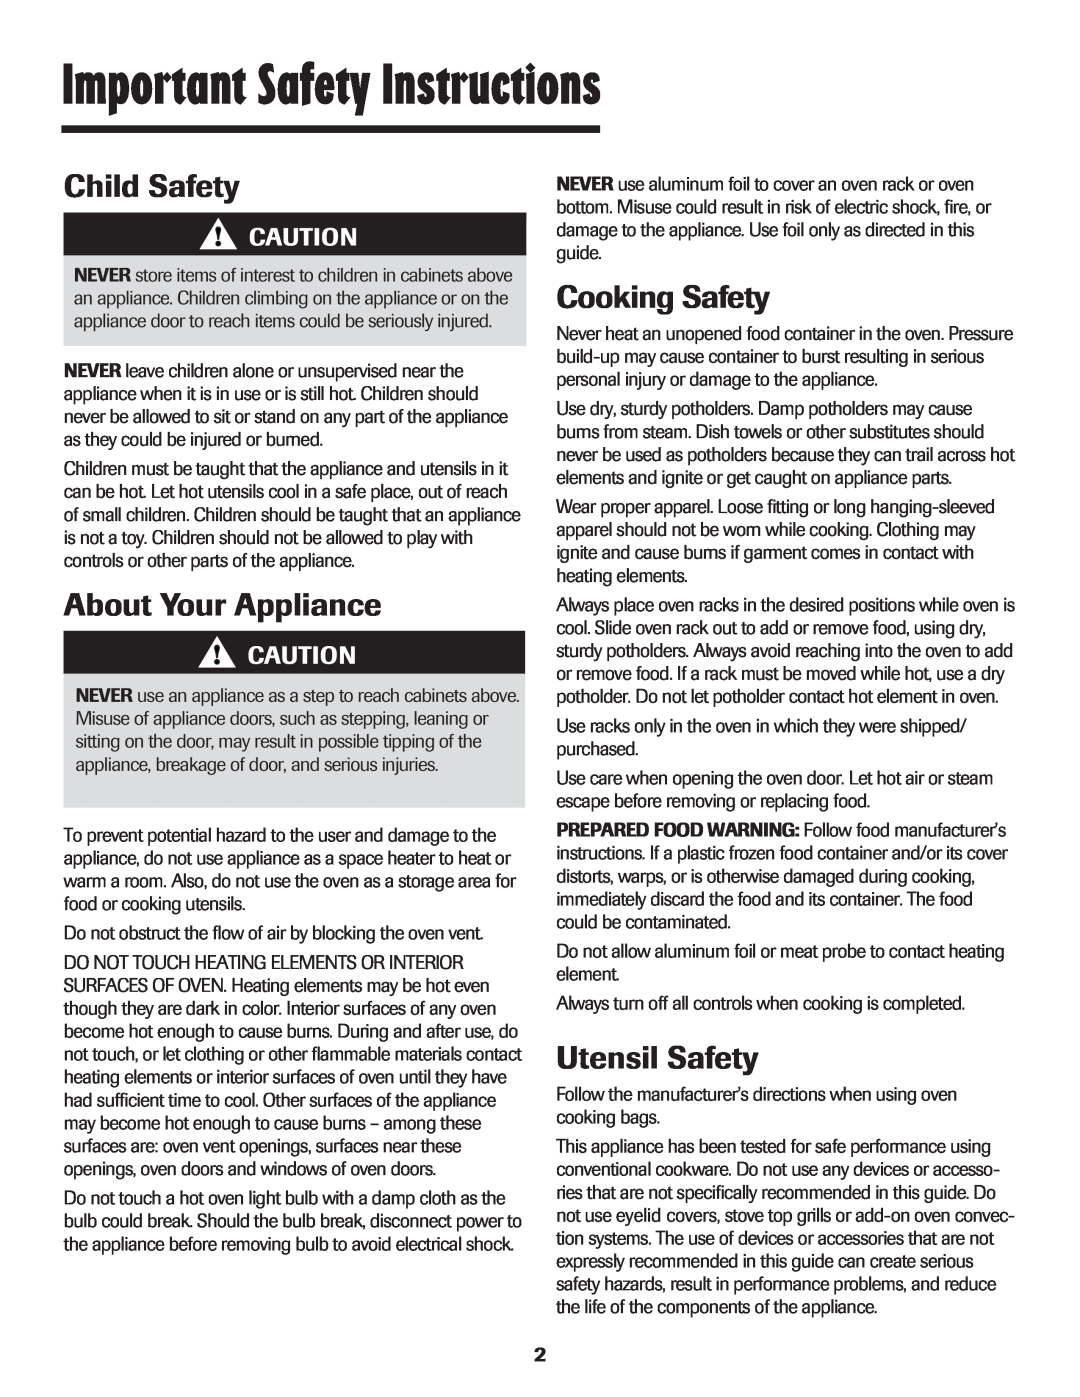 Maytag Oven warranty Child Safety, About Your Appliance, Cooking Safety, Utensil Safety, Important Safety Instructions 